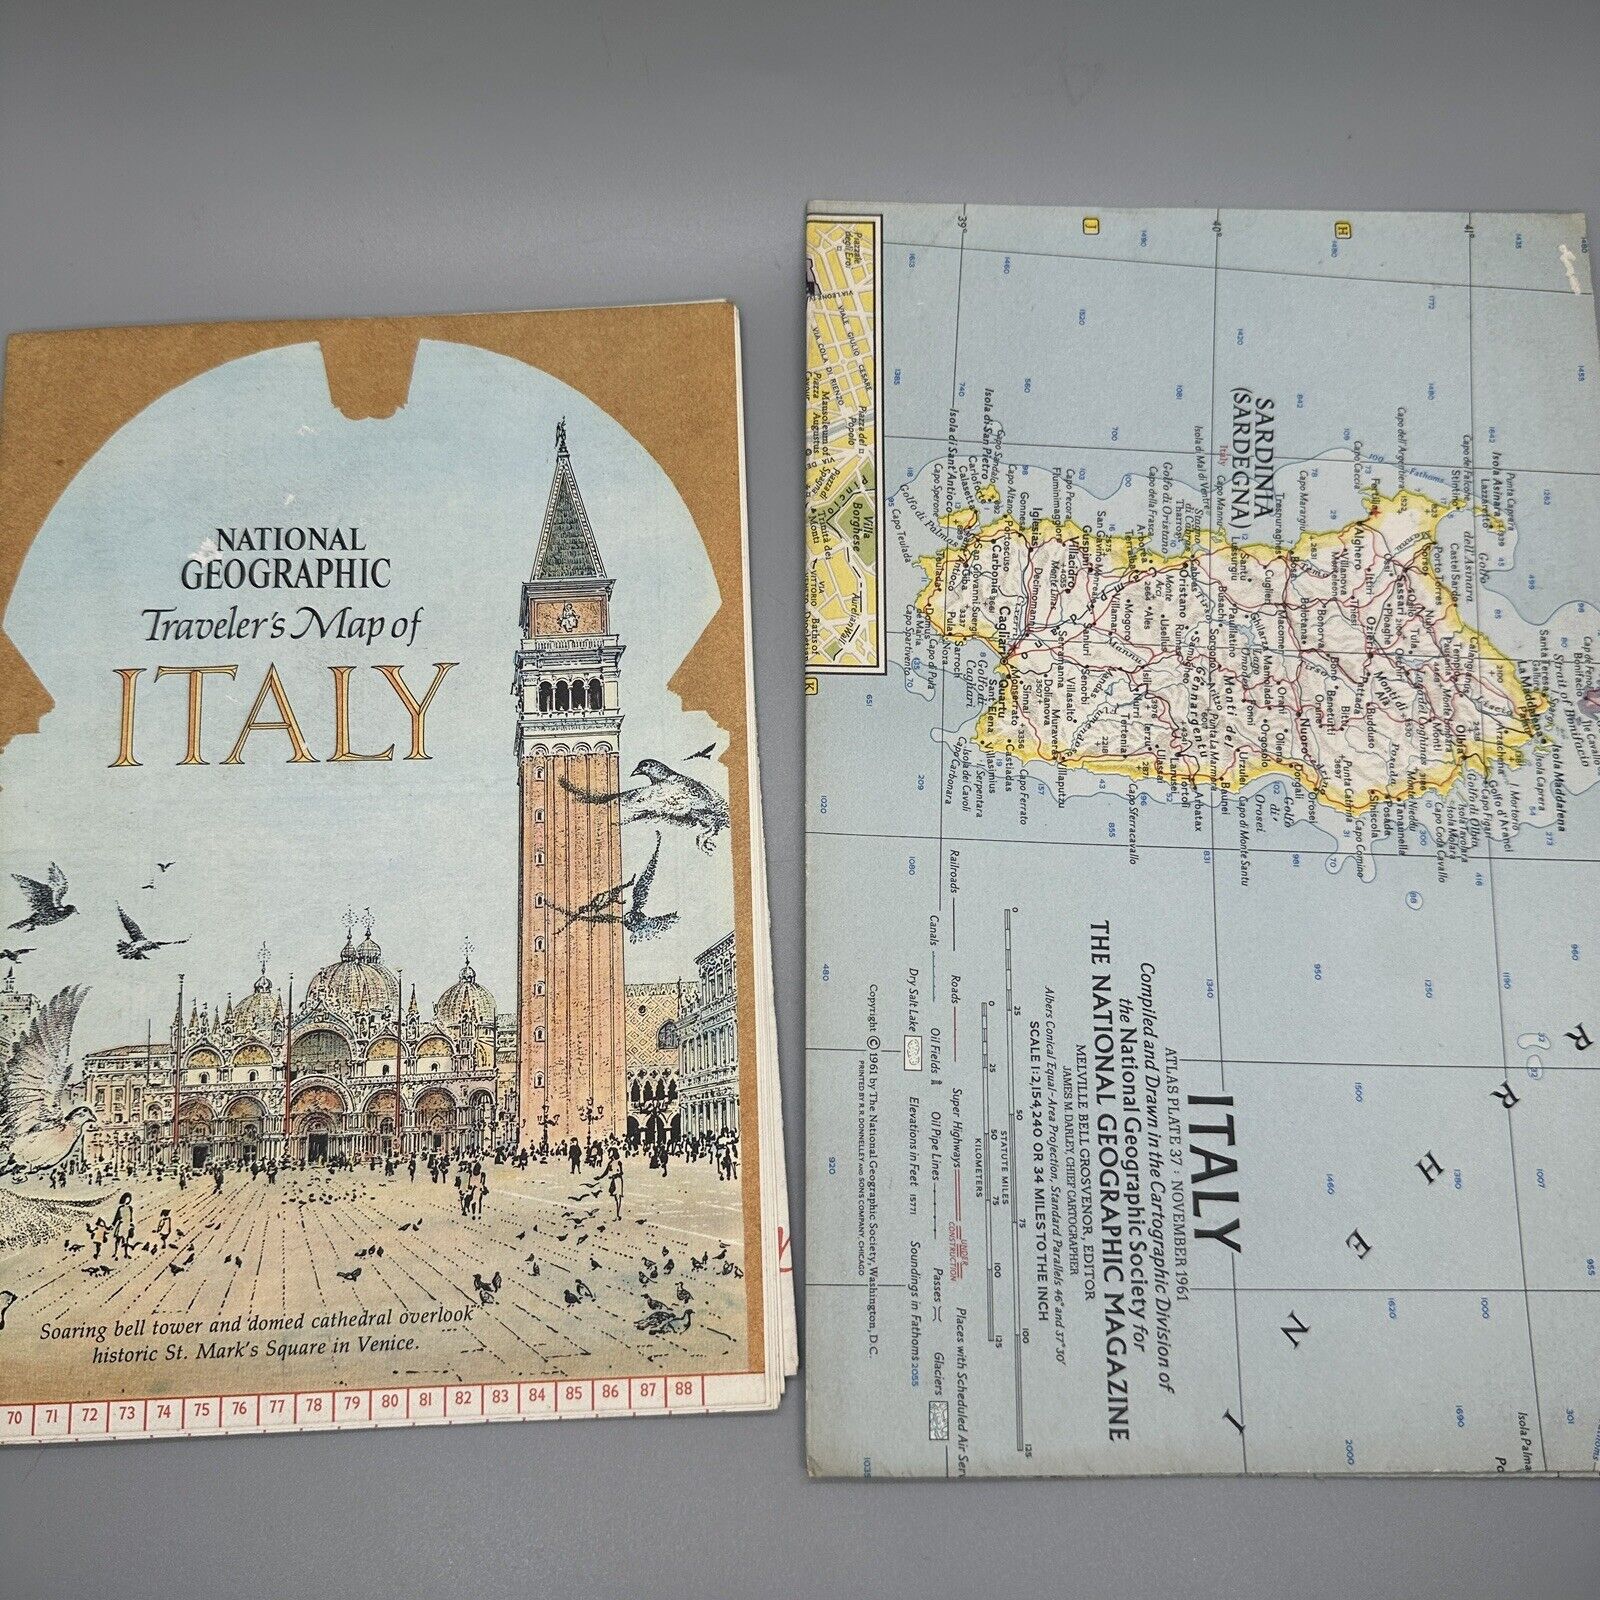 1961 Italy National Geographic Vintage Travelers Maps, MCM Poster Art